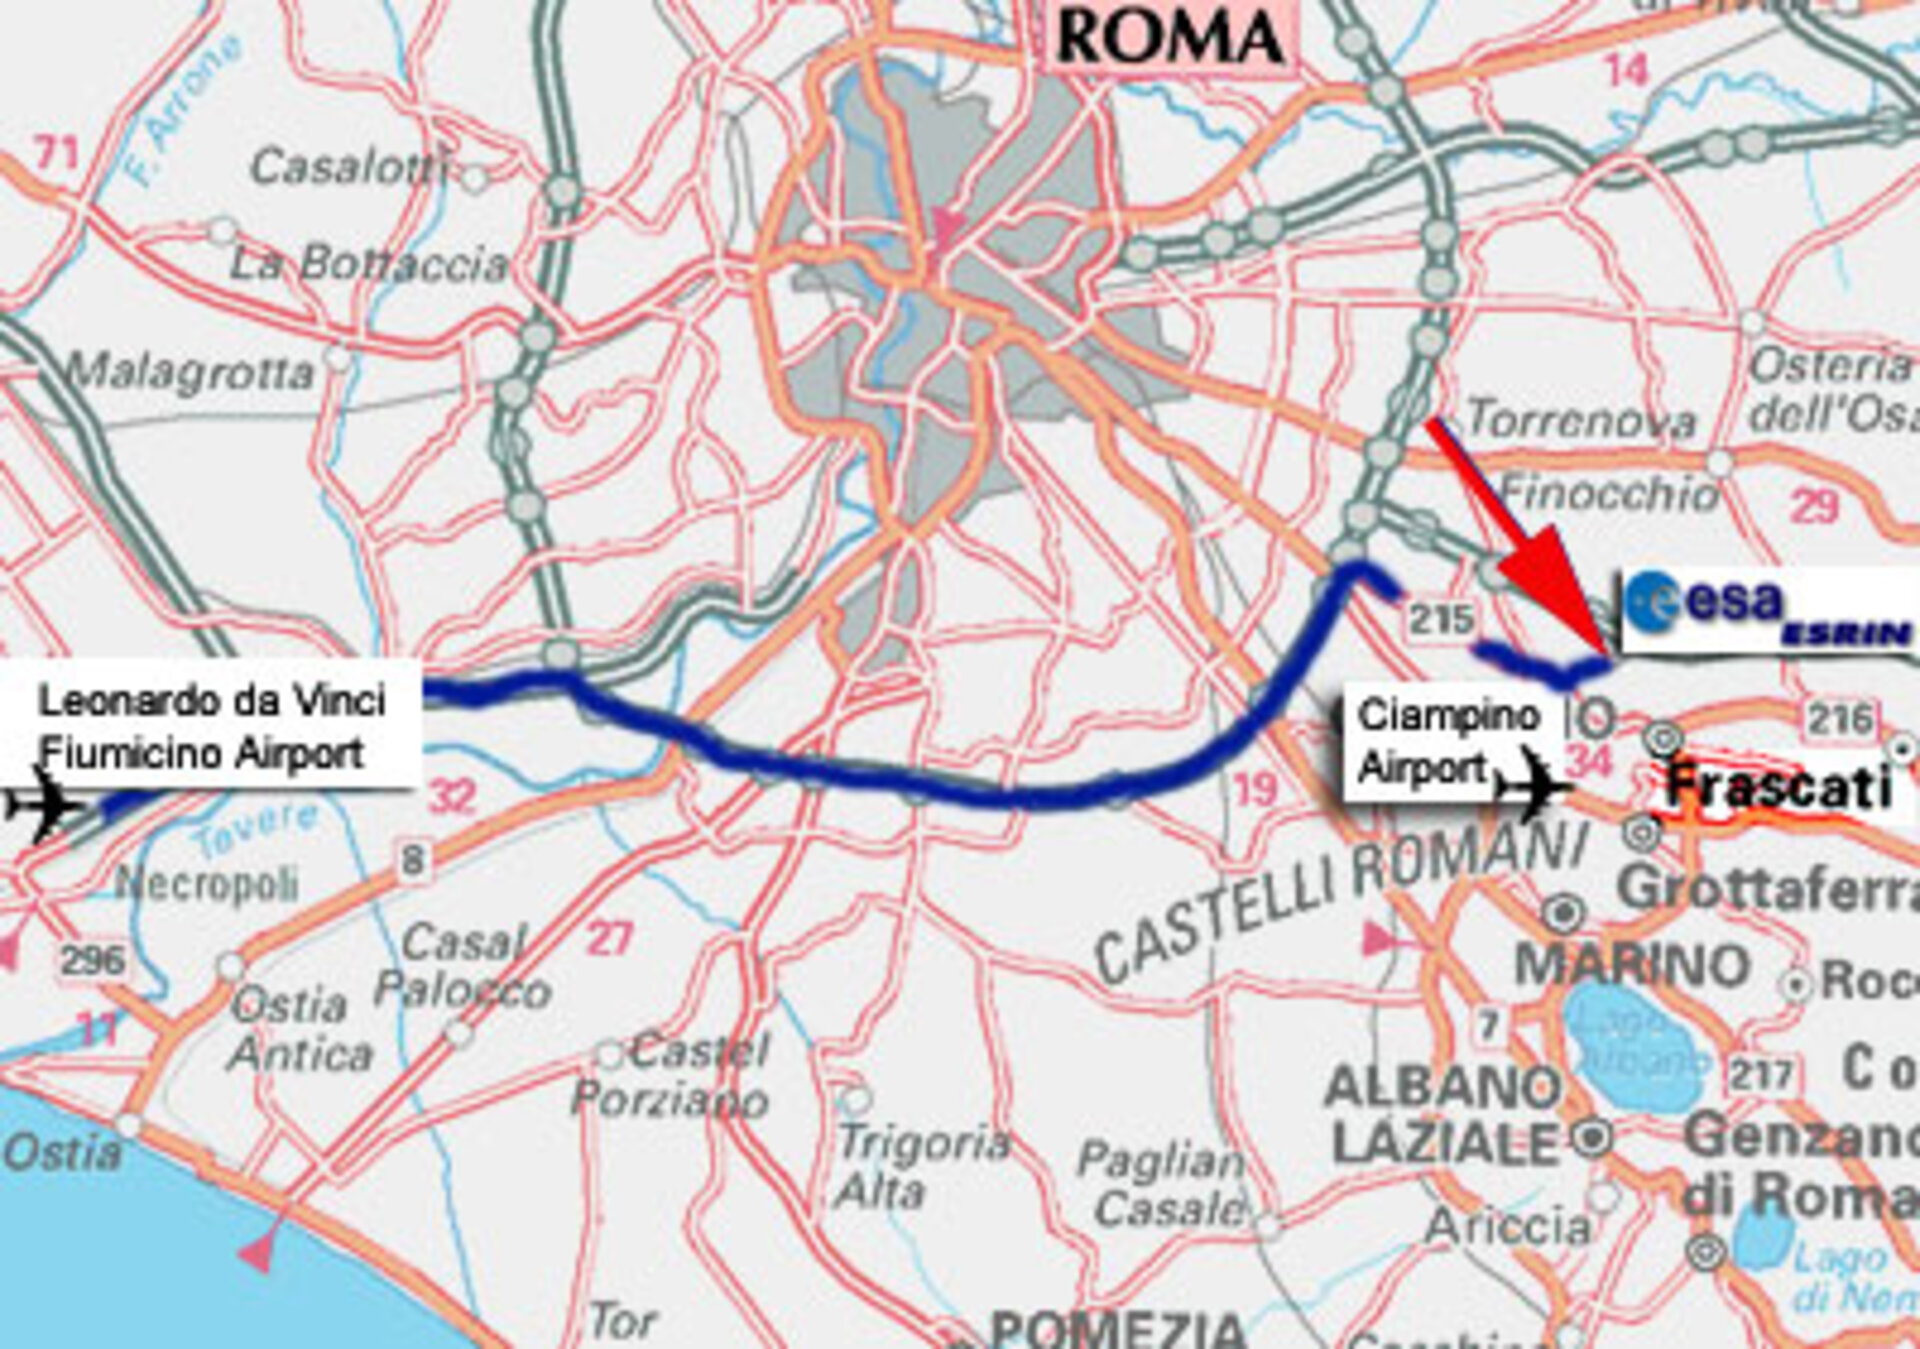 How to get to ESRIN from Fiumicino airport